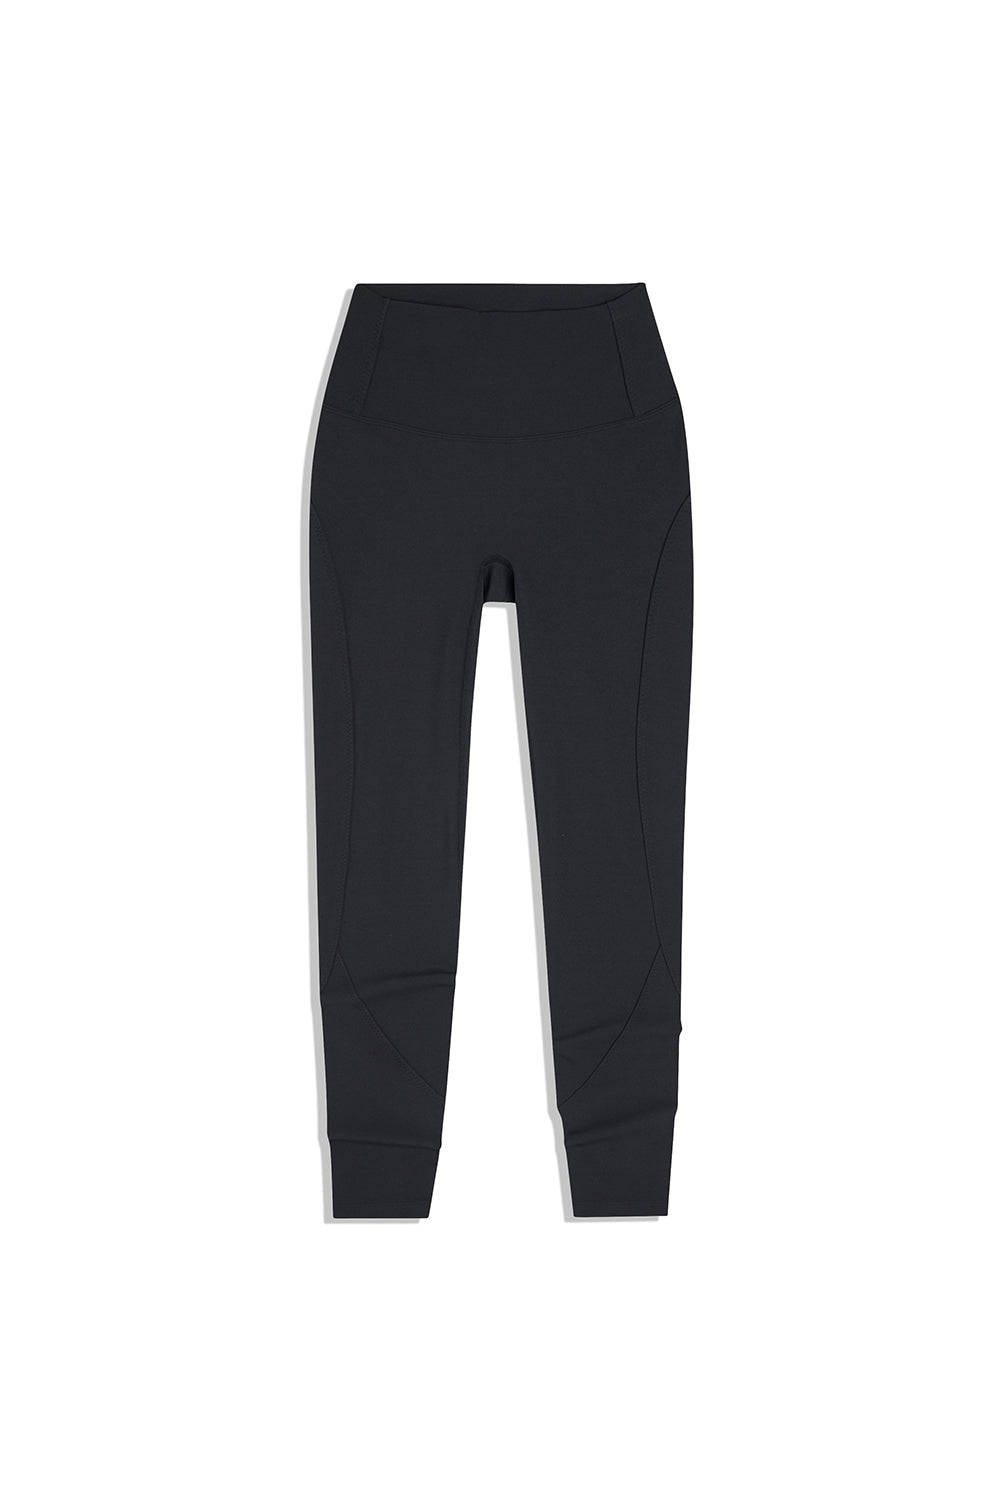 Aircooling Curve Line Ankle Length Legging